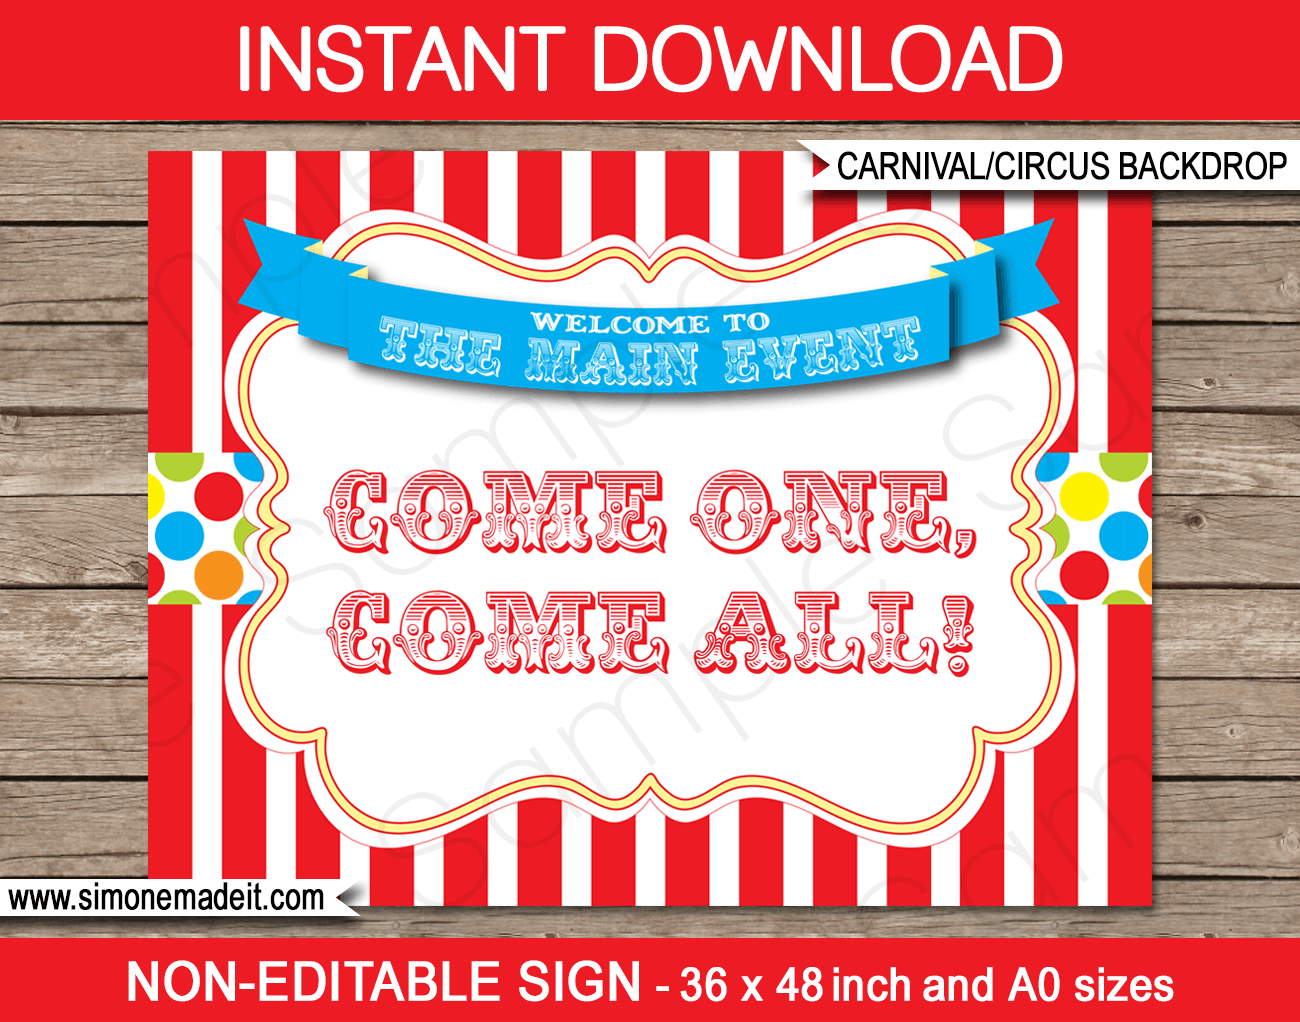 Printable Carnival Party Backdrop Sign | Come One Come All | Circus Party | Decorations | DIY Template | INSTANT DOWNLOAD via simonemadeit.com